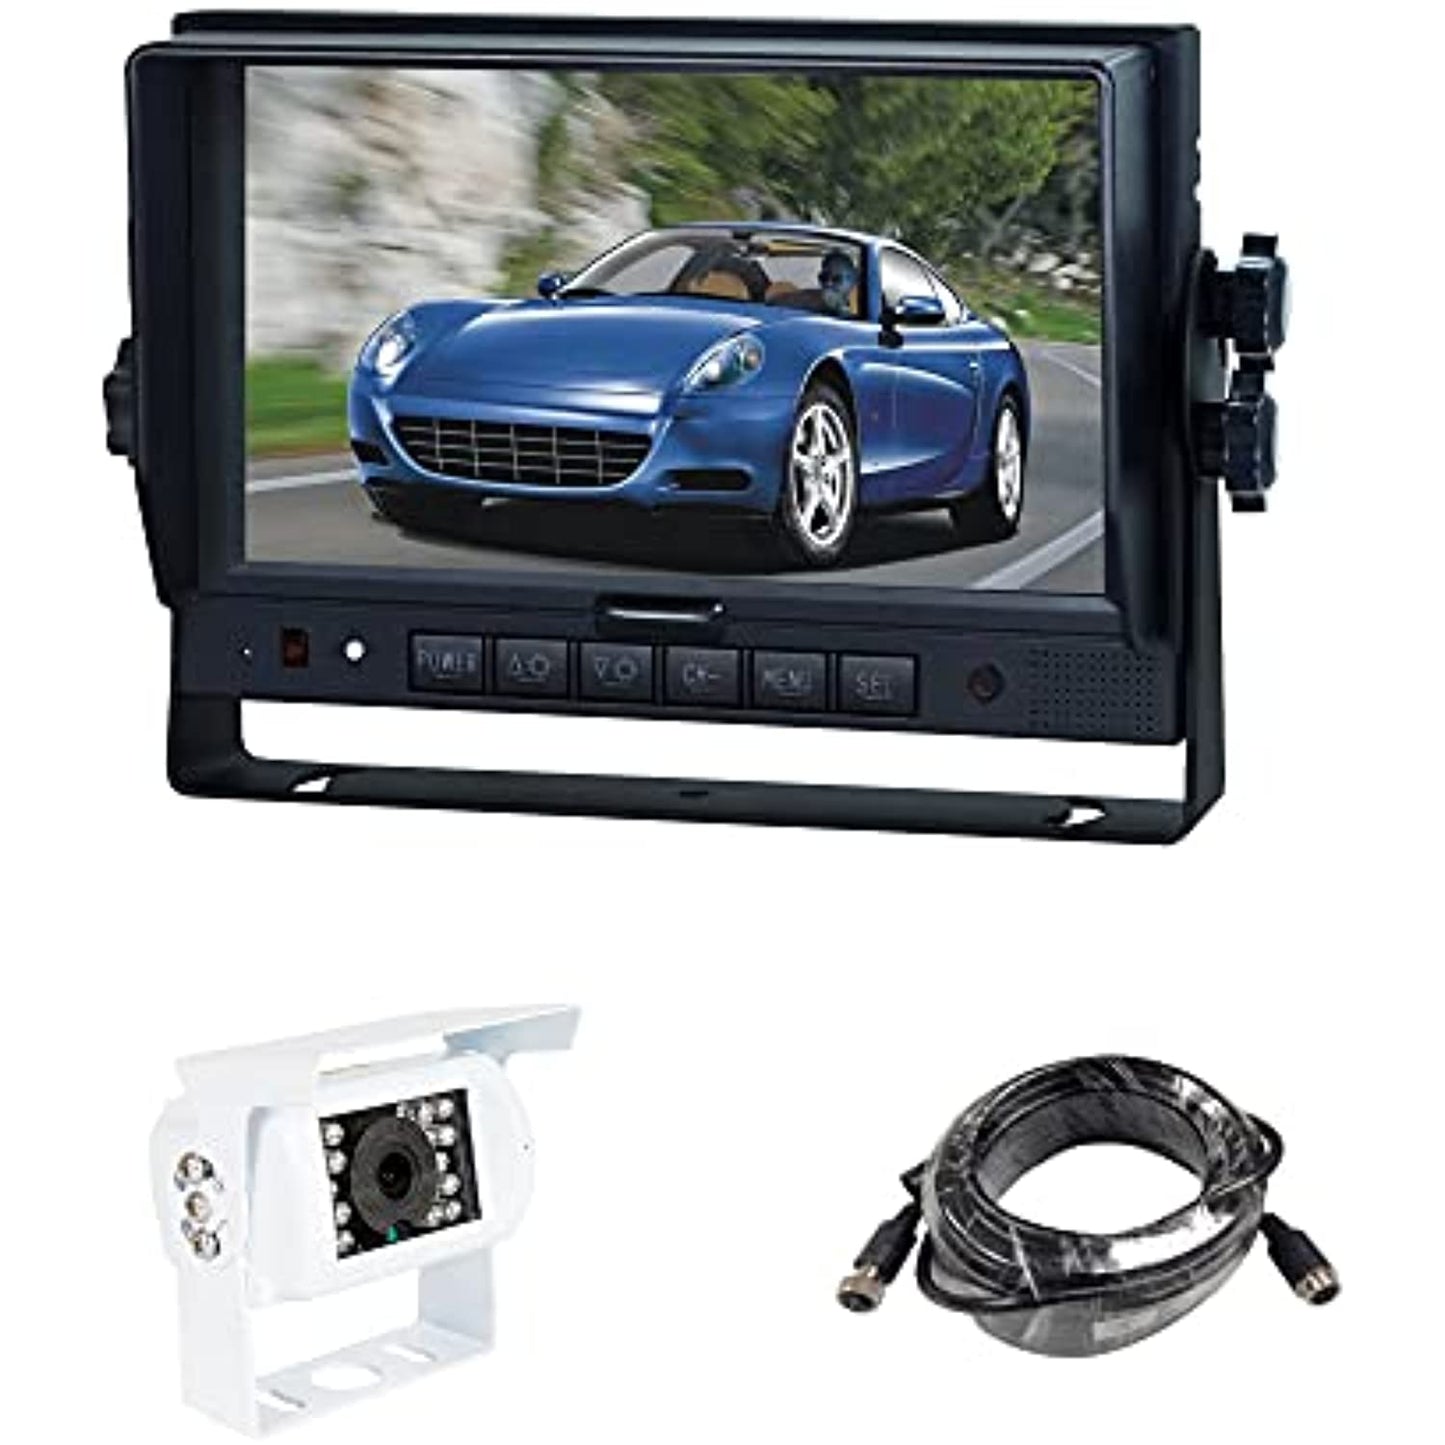 RYDEEN M7020WKR 7-Inch Monitor with CM-R1000W Camera ,35feet Extension Cable